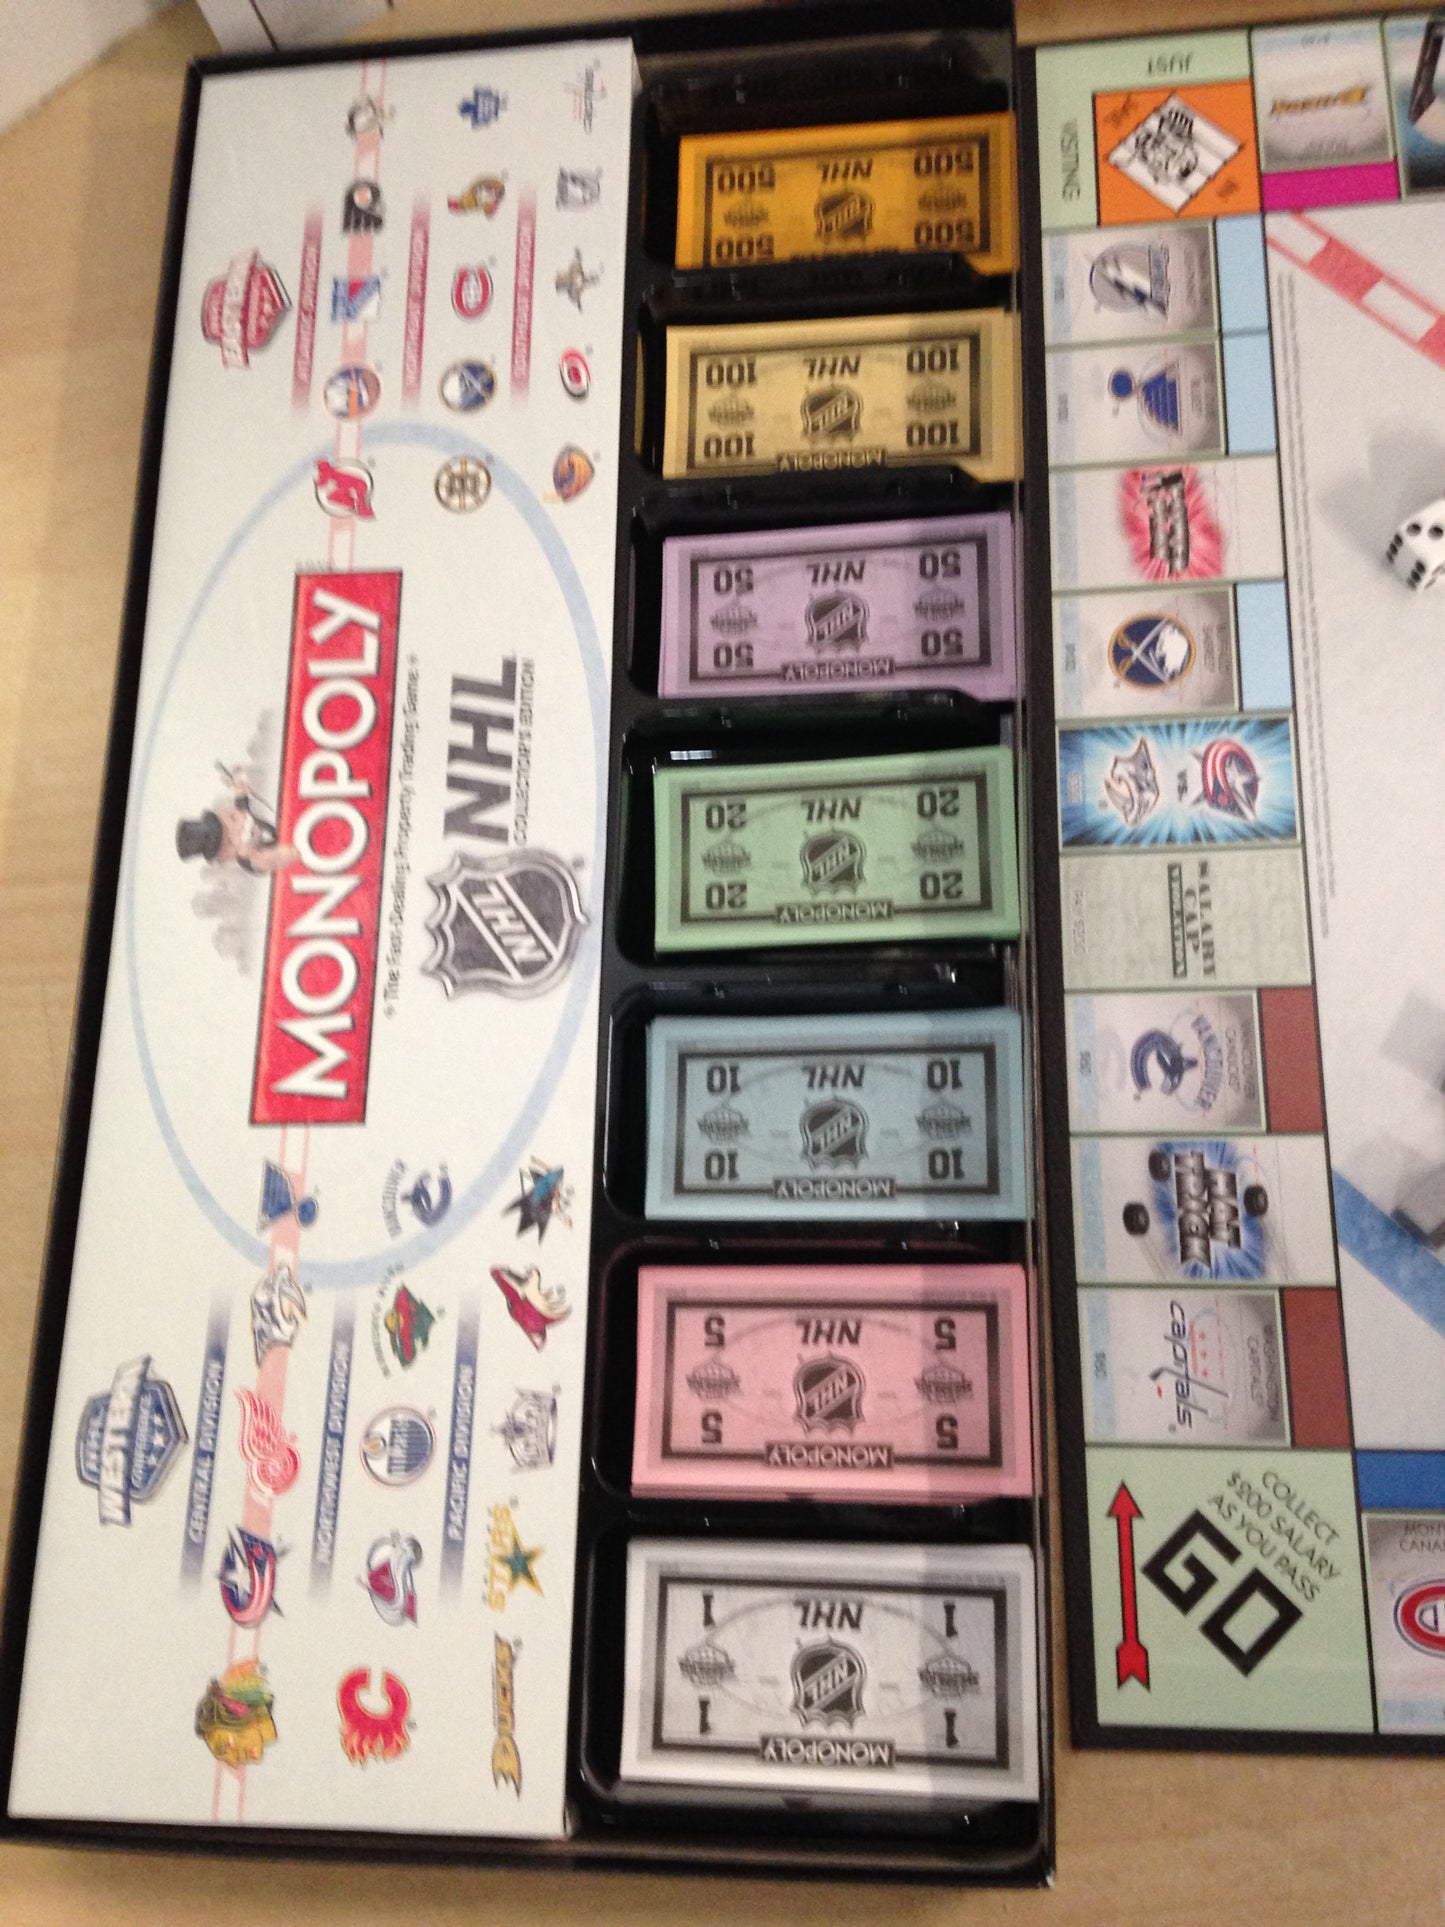 Y Game Monopoly NHL Includes All 30 NHL Teams Complete As New